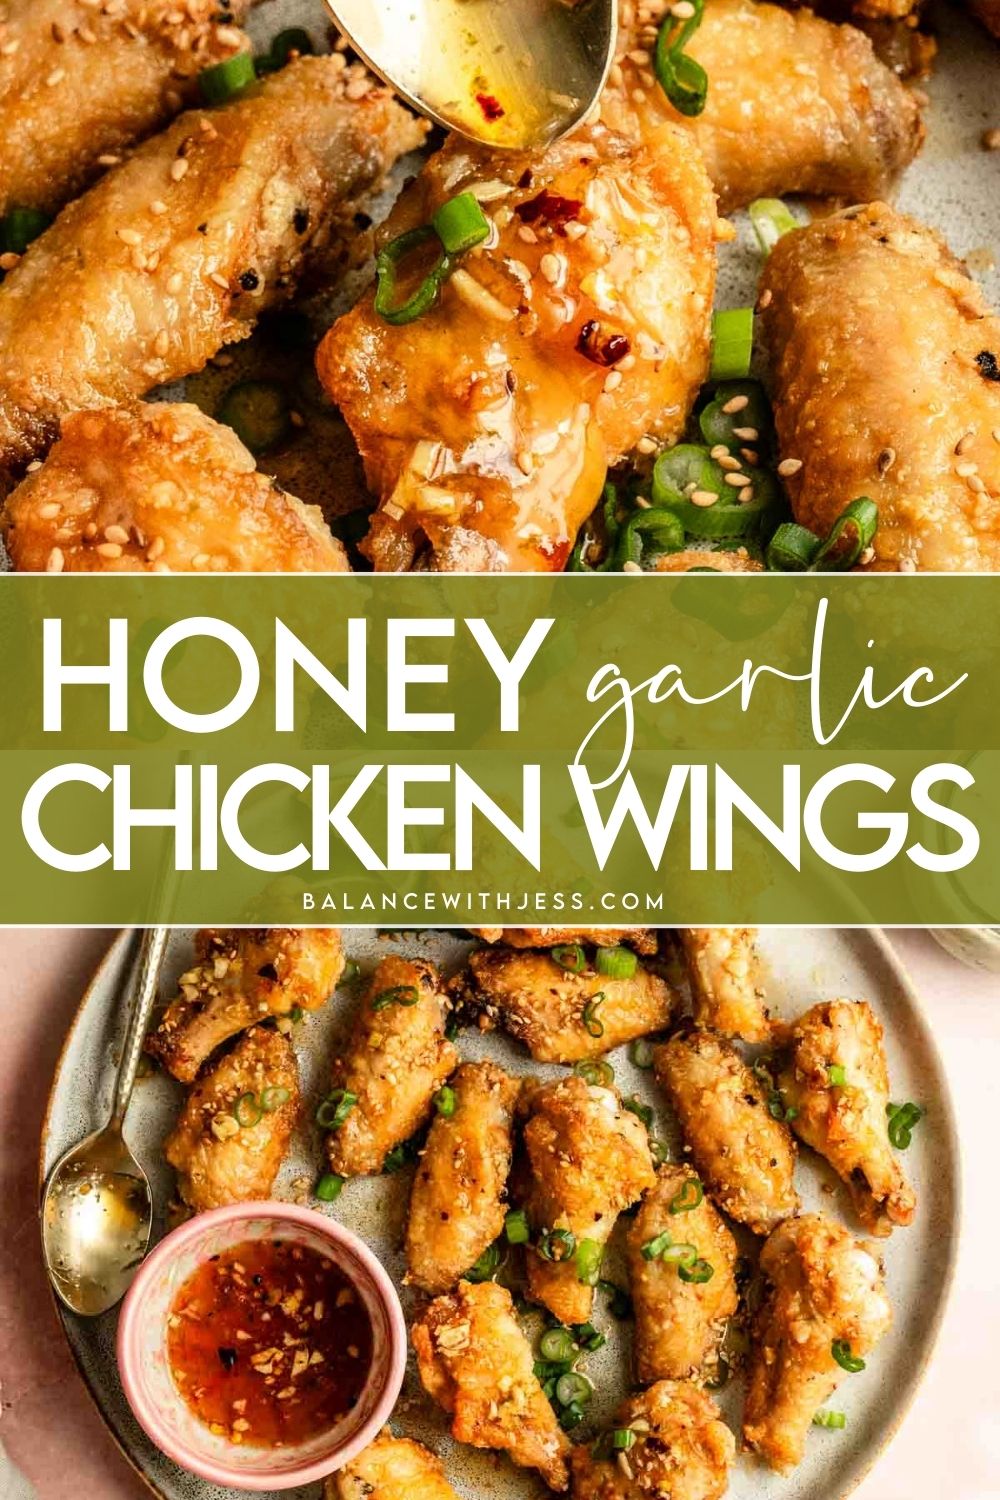 These crispy Air Fryer Honey Garlic Chicken Wings are the perfect party food, especially for the Superbowl! The honey garlic sauce is finger licking good and also goes great with salmon, pork, and shrimp! Easy, delicious, and healthy!